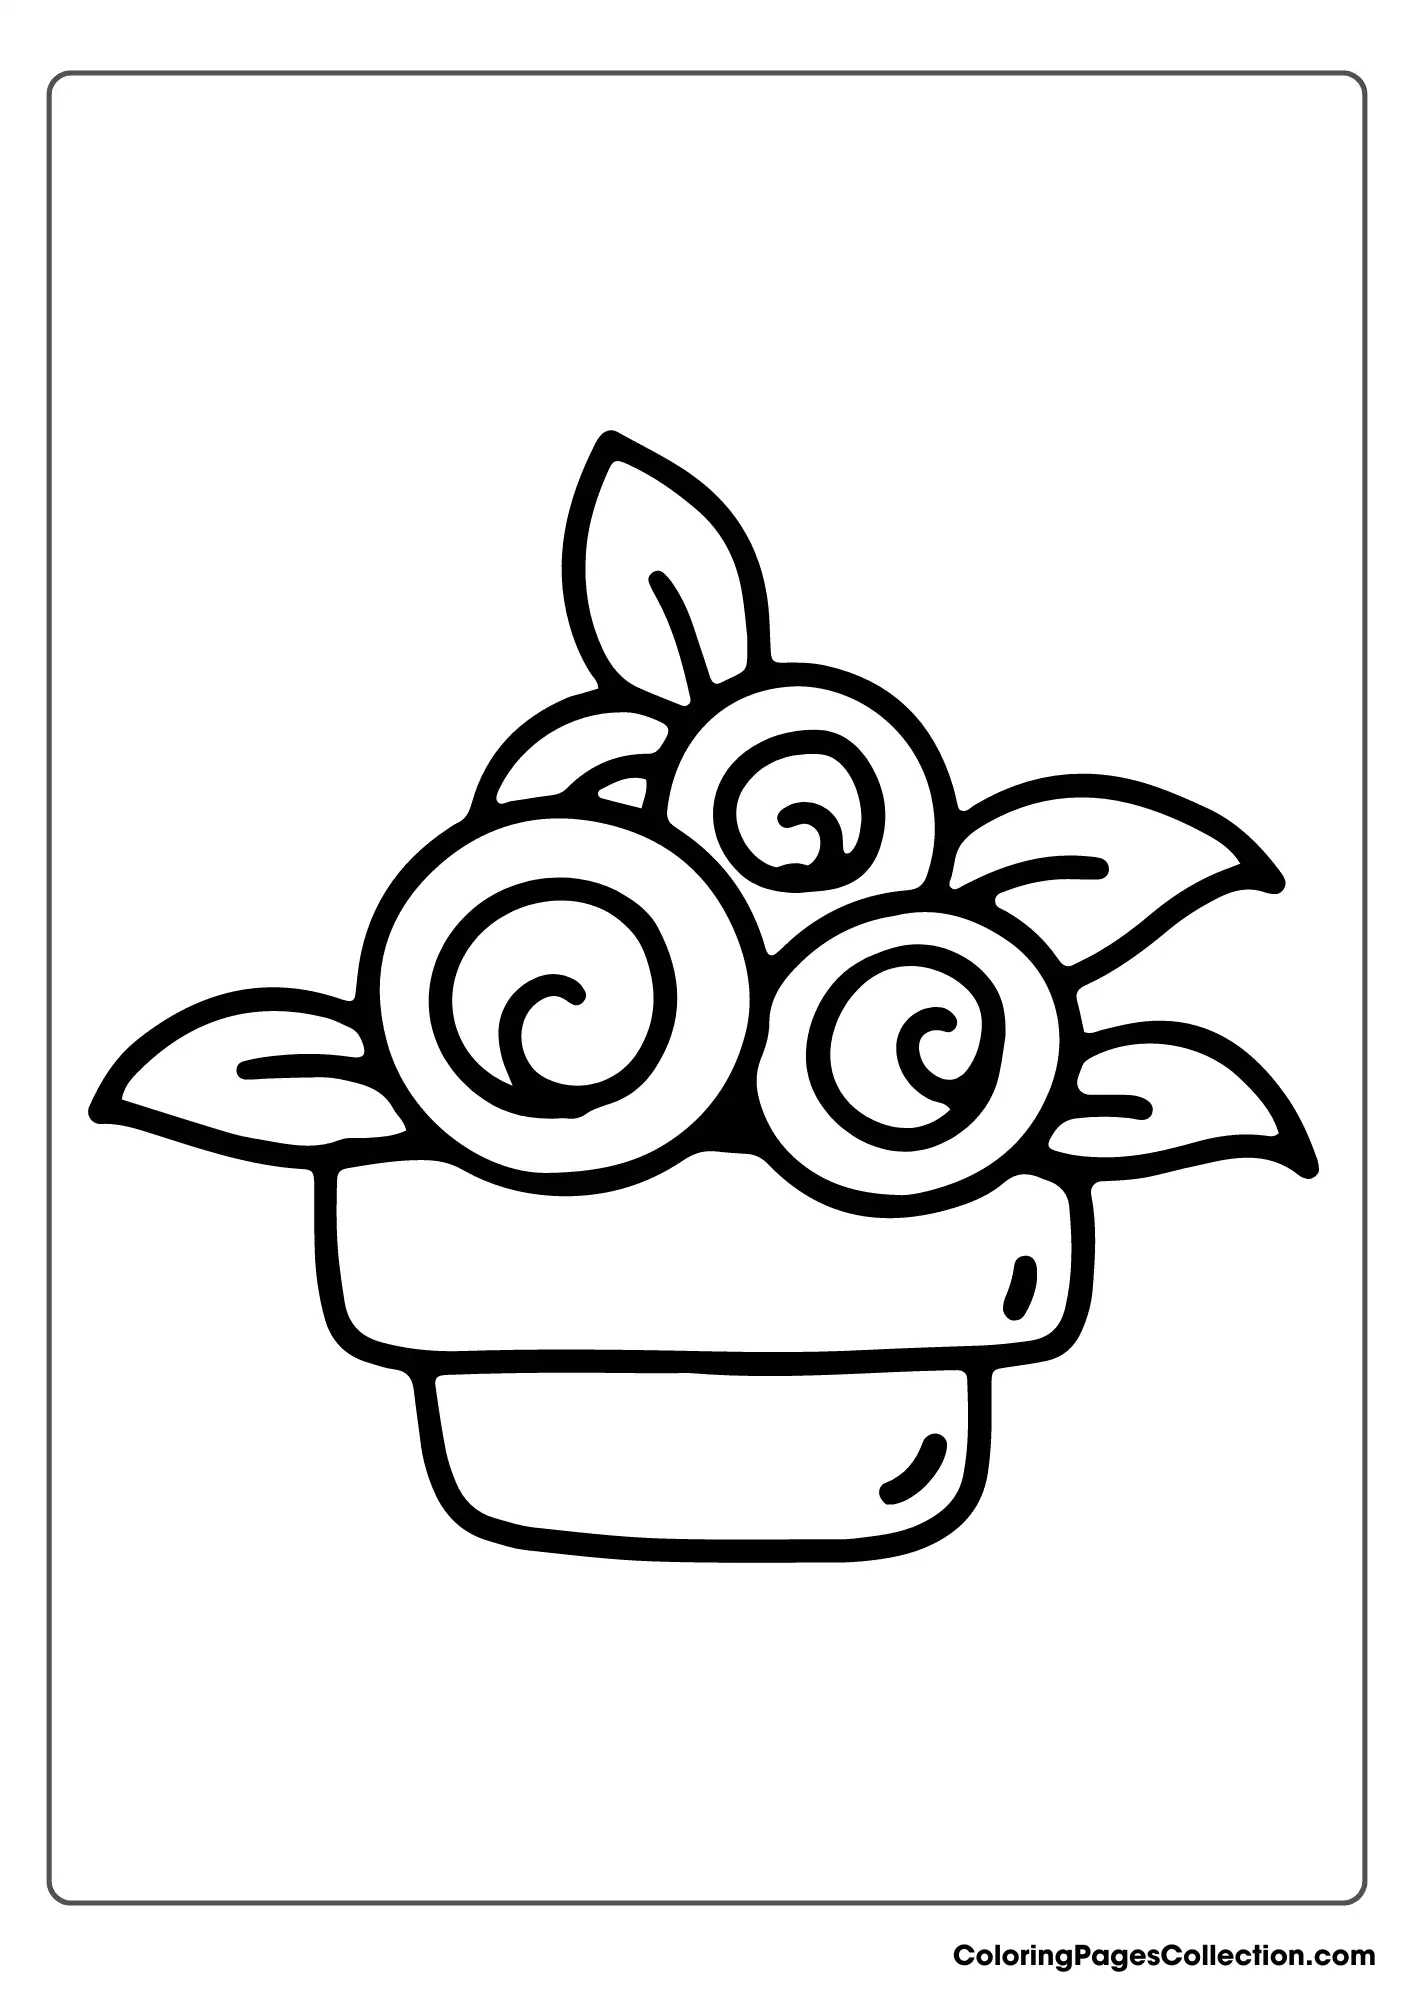 A Coloring Page Of Flowers In A Pot